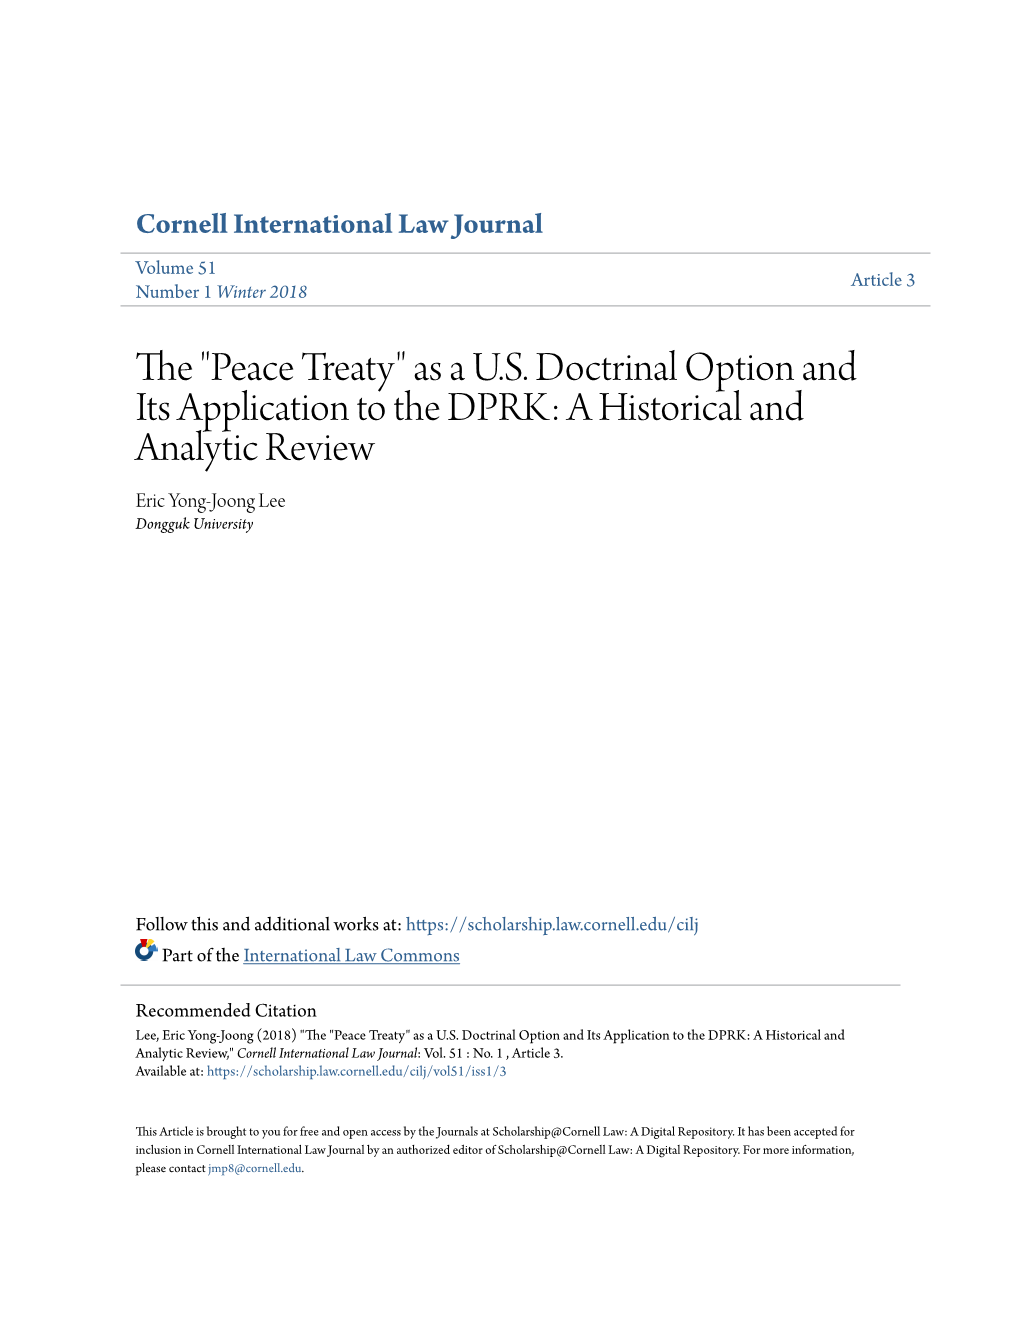 The "Peace Treaty" As a U.S. Doctrinal Option and Its Application to the DPRK: a Historical and Analytic Review Eric Yong-Joong Lee Dongguk University